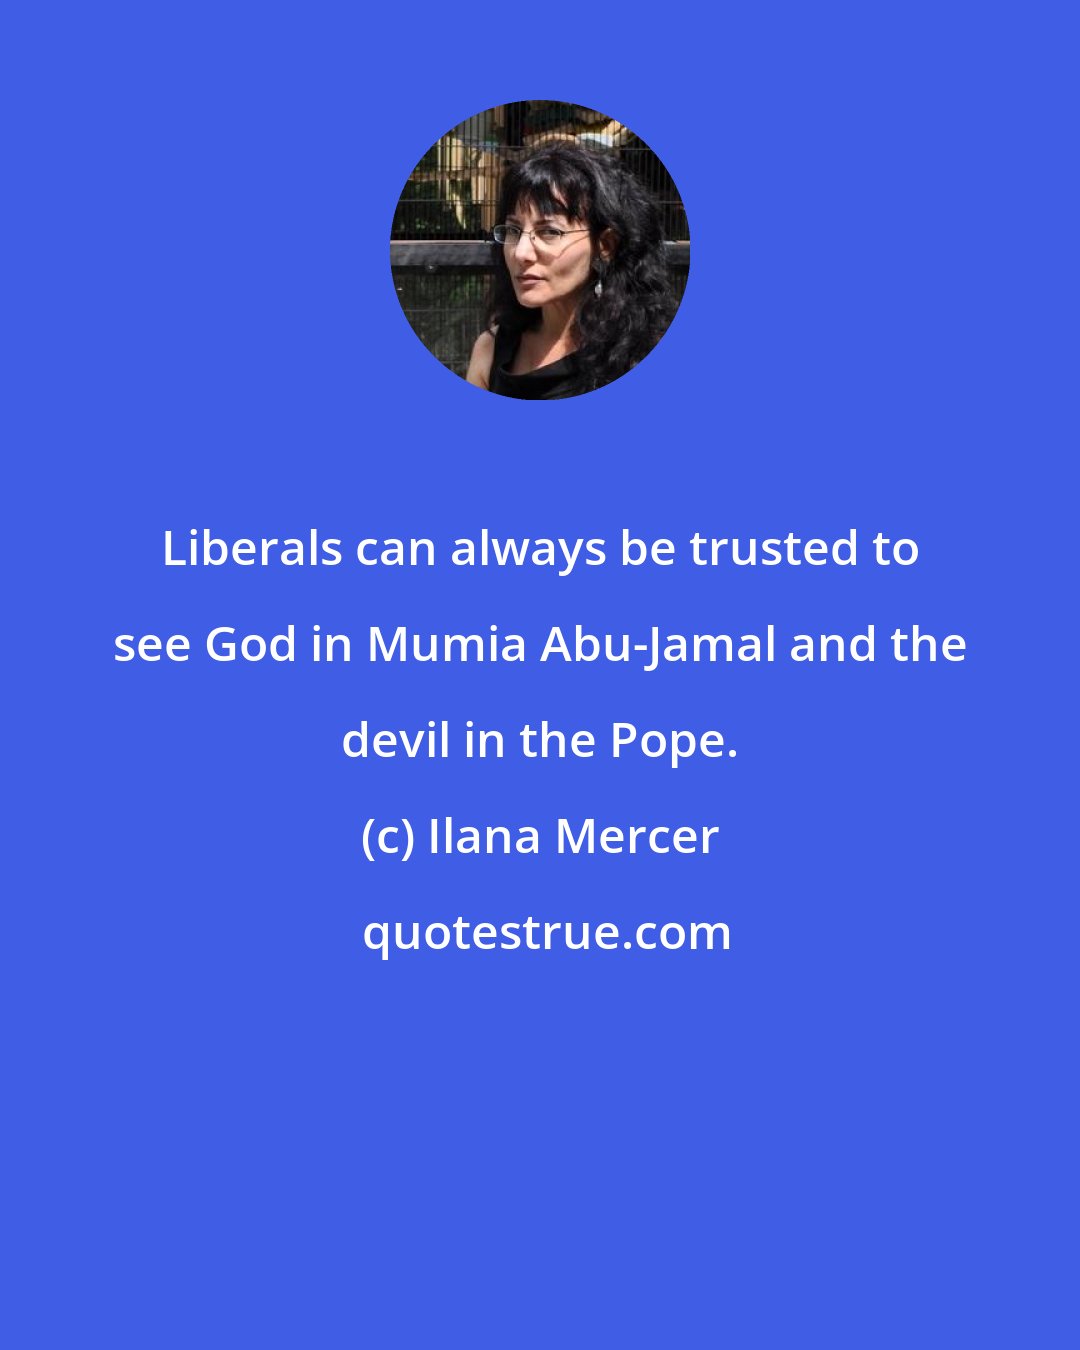 Ilana Mercer: Liberals can always be trusted to see God in Mumia Abu-Jamal and the devil in the Pope.